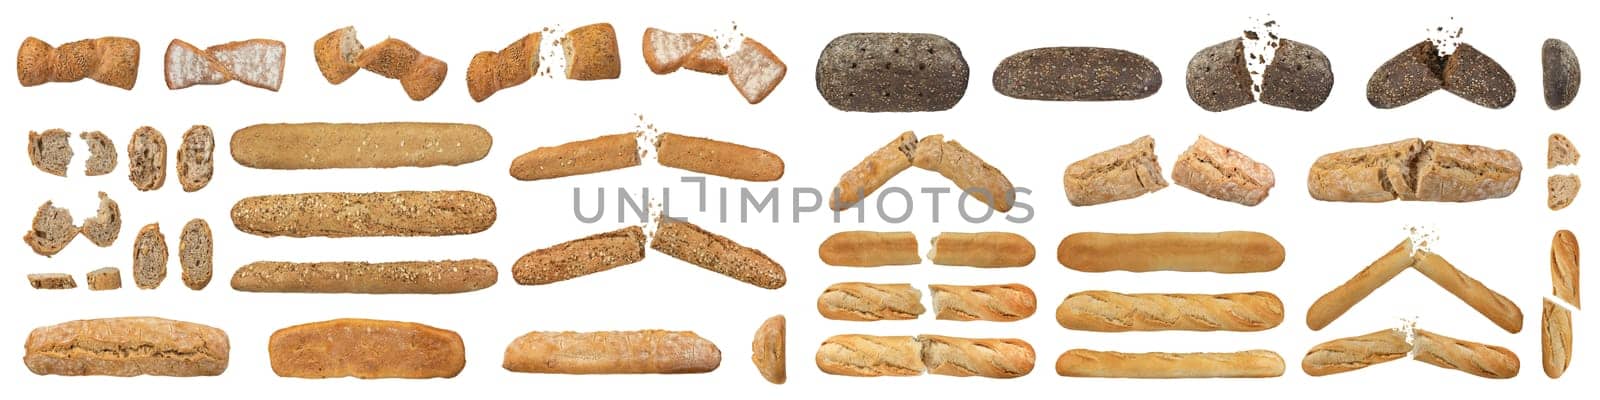 Many different loaves of bread, different varieties and shapes isolated on a white background. Full size loaves of bread, cut into slices or broken apart. Bread isolate for inserting into design